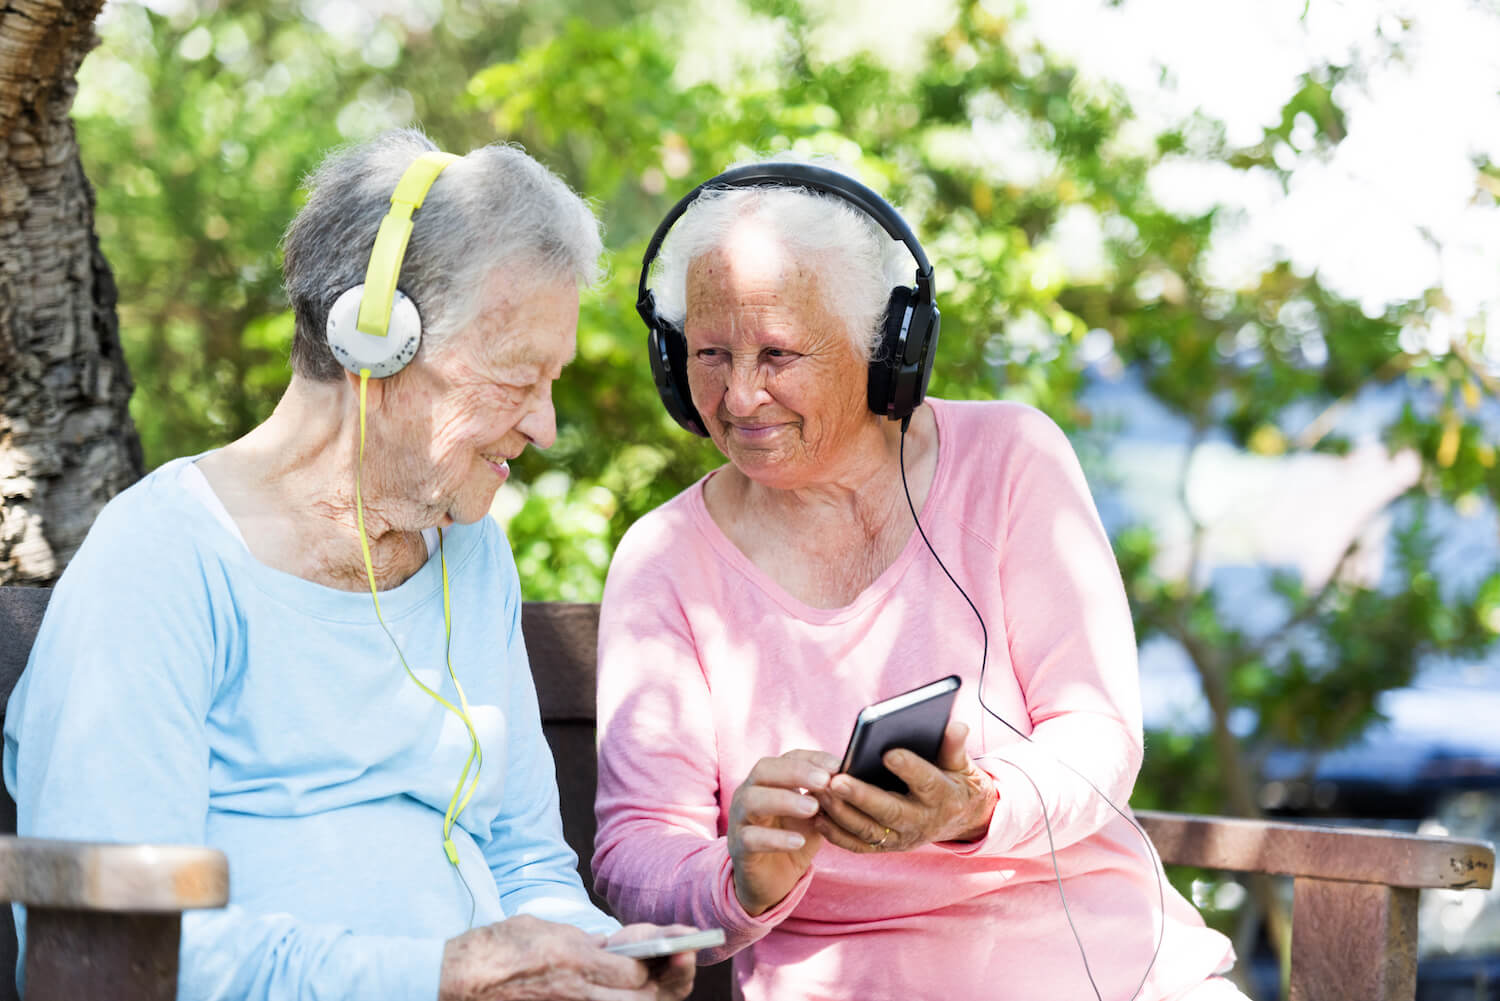 Two senior women seated on a garden bench and listening to music together with headphones